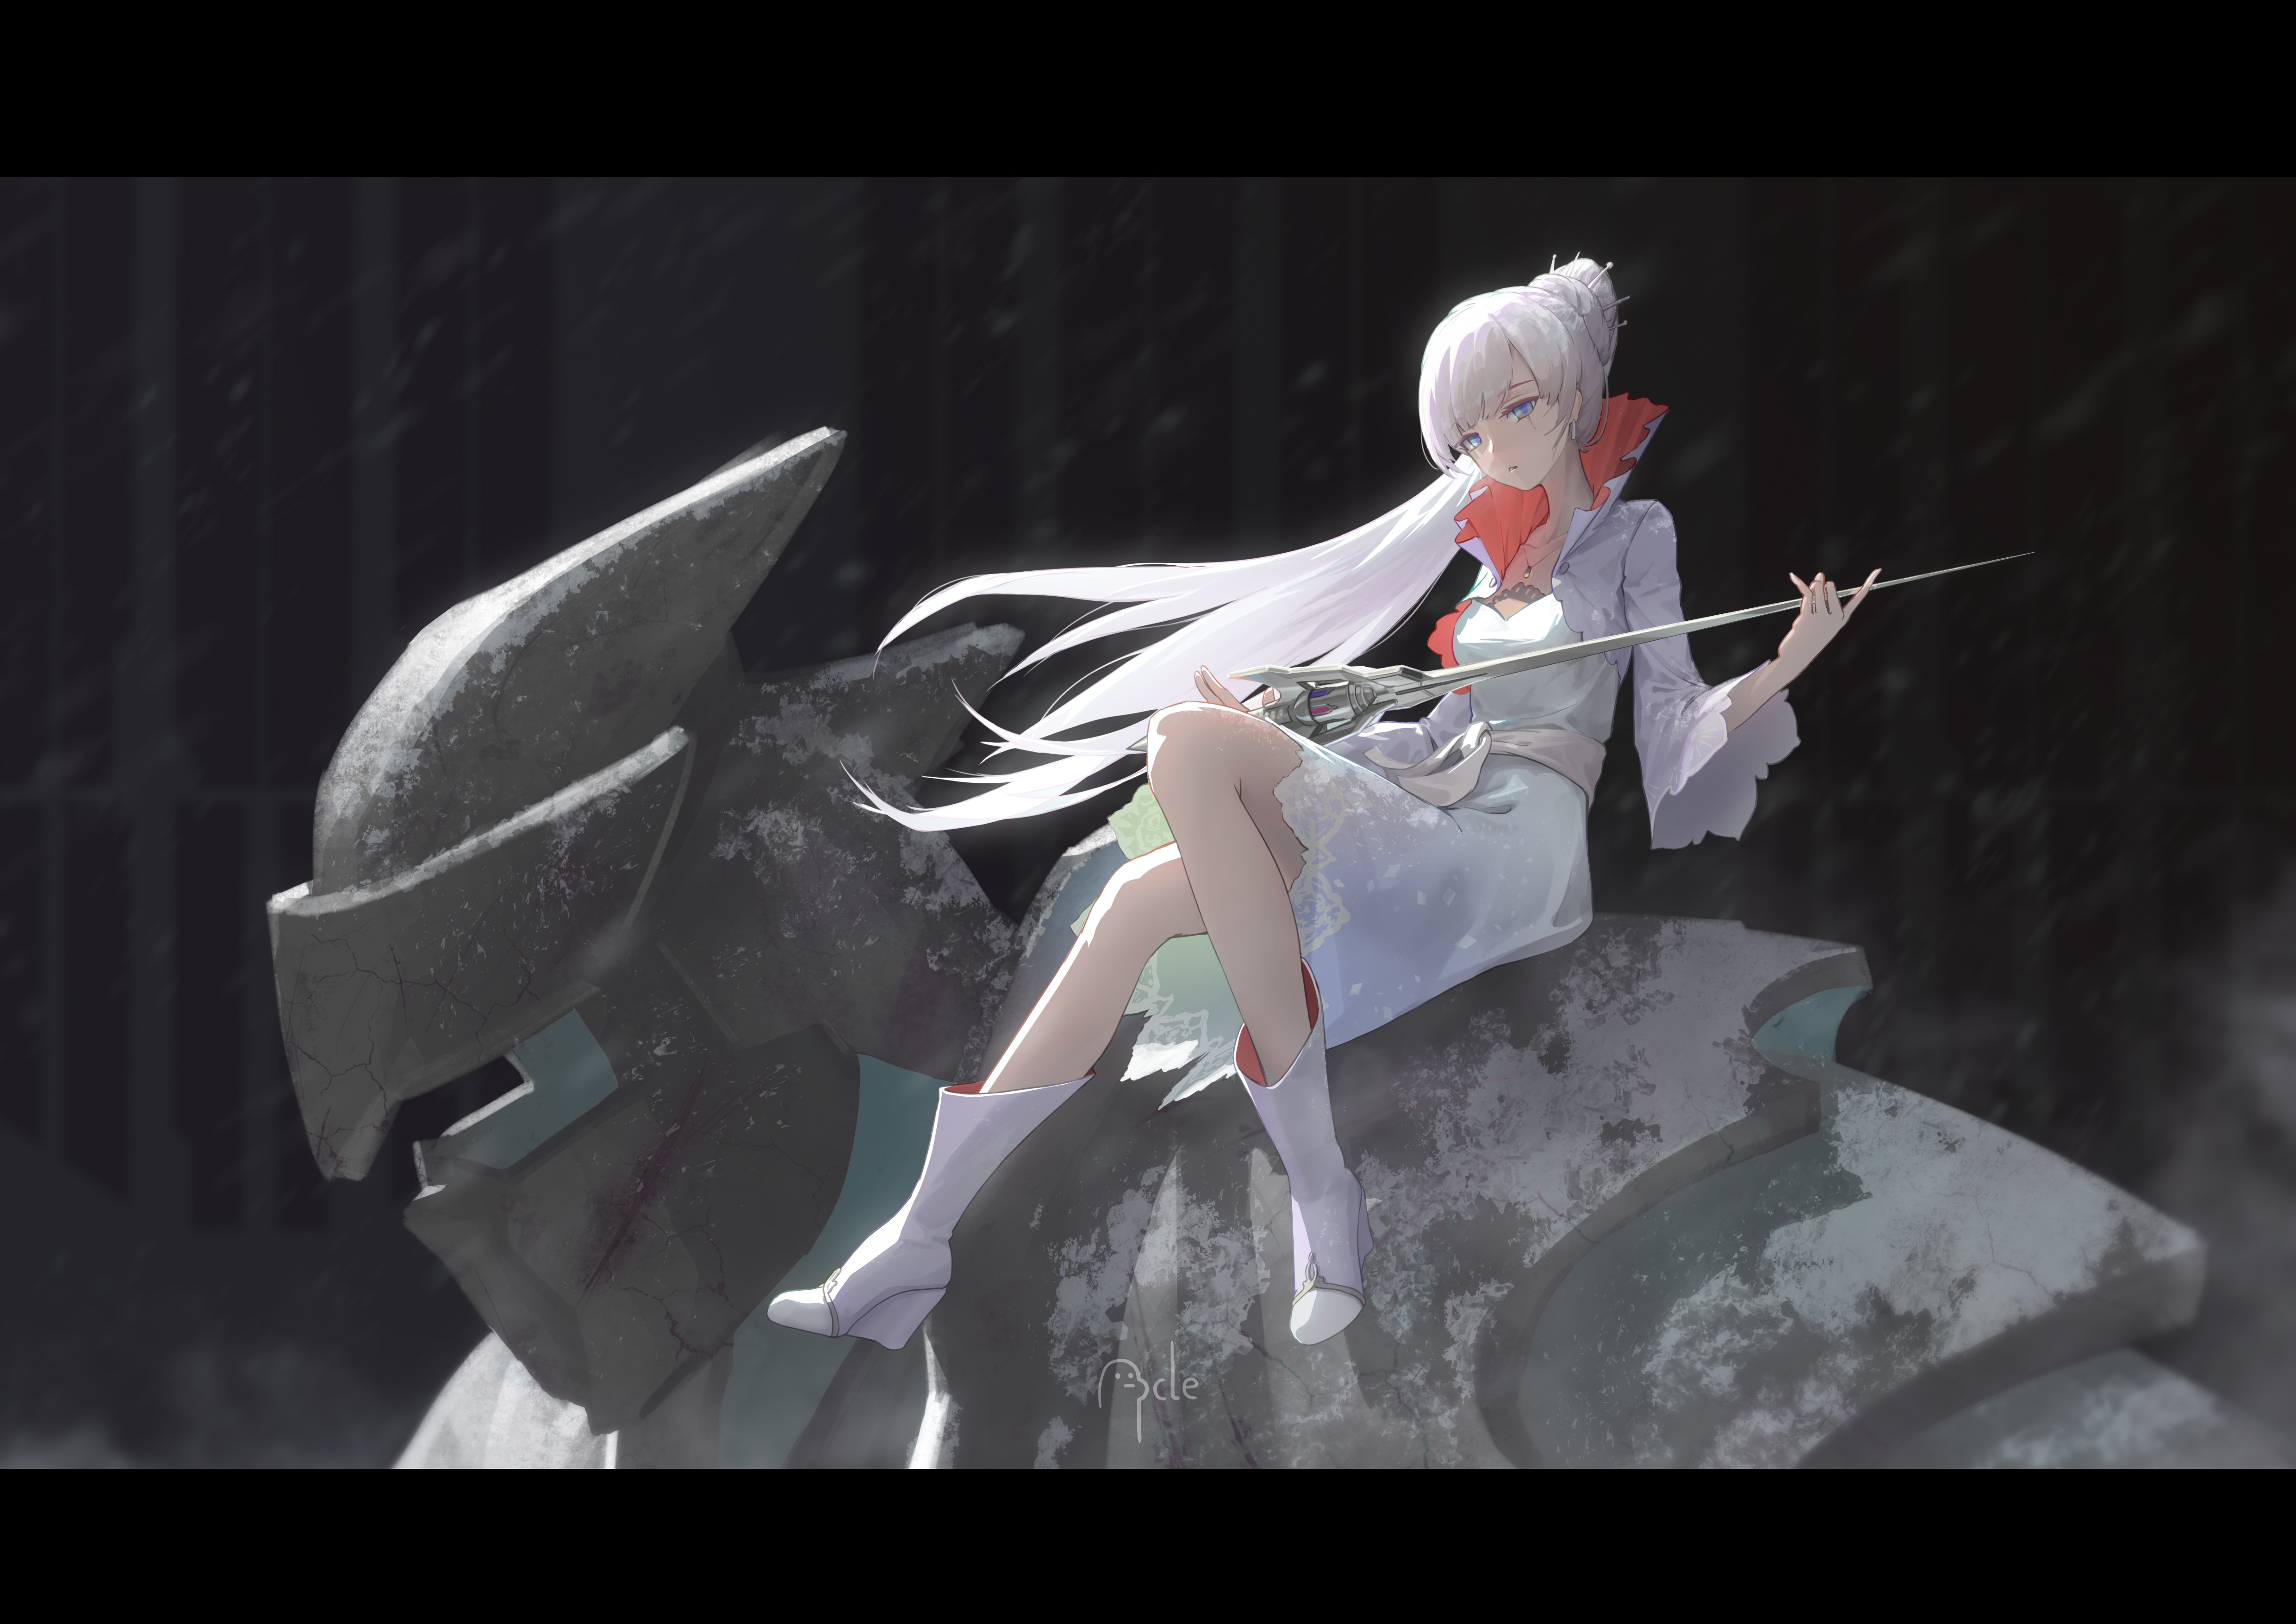 Anime Anime Girls Pixiv Weiss Schnee RWBY Looking At Viewer Sitting Long Hair Women With Swords Swor 4961x3508